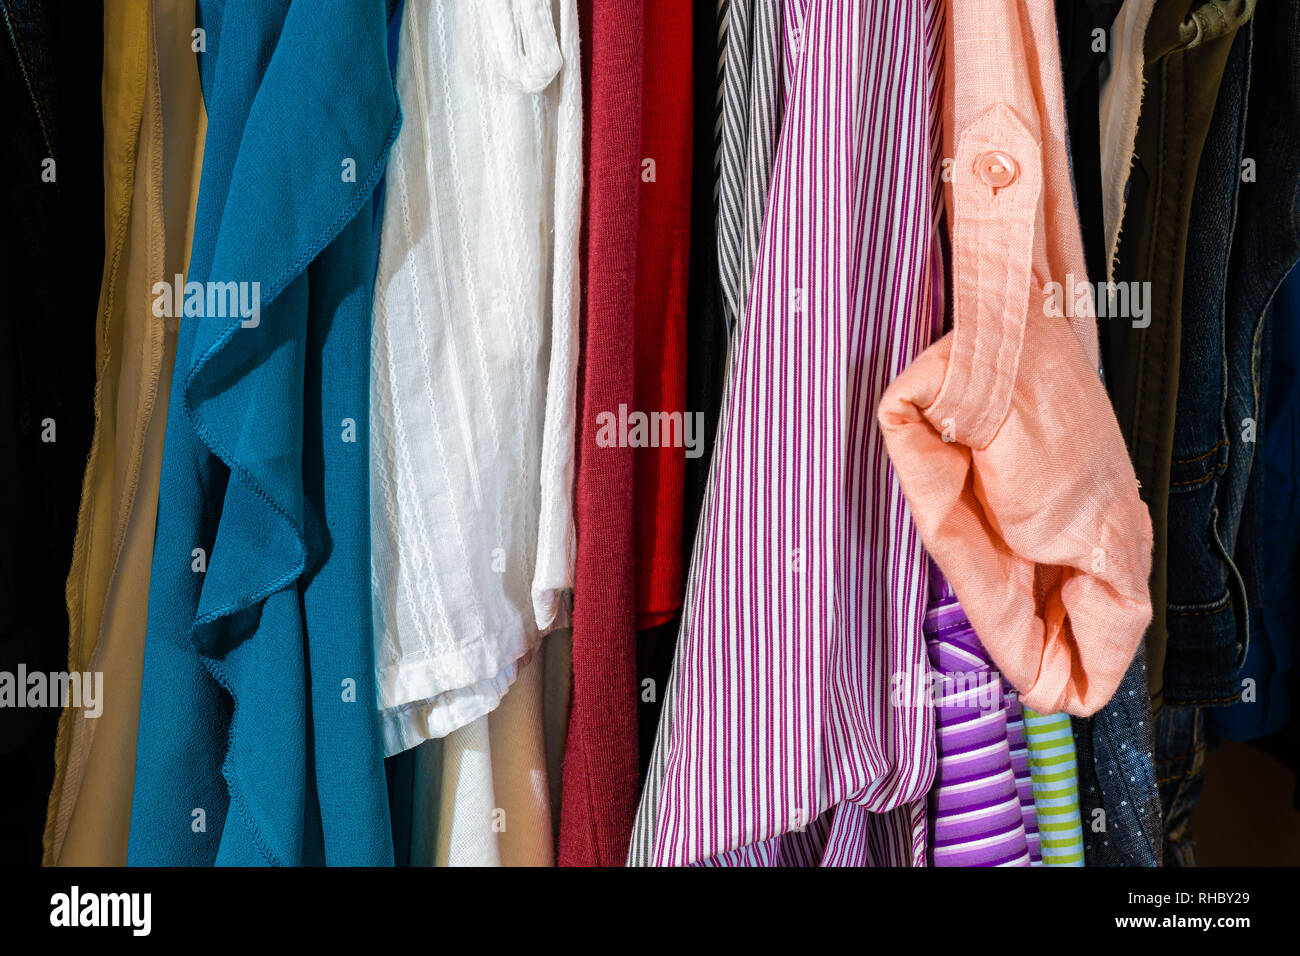 Close up on women's clothes hanging in closet/wardrobe Stock Photo